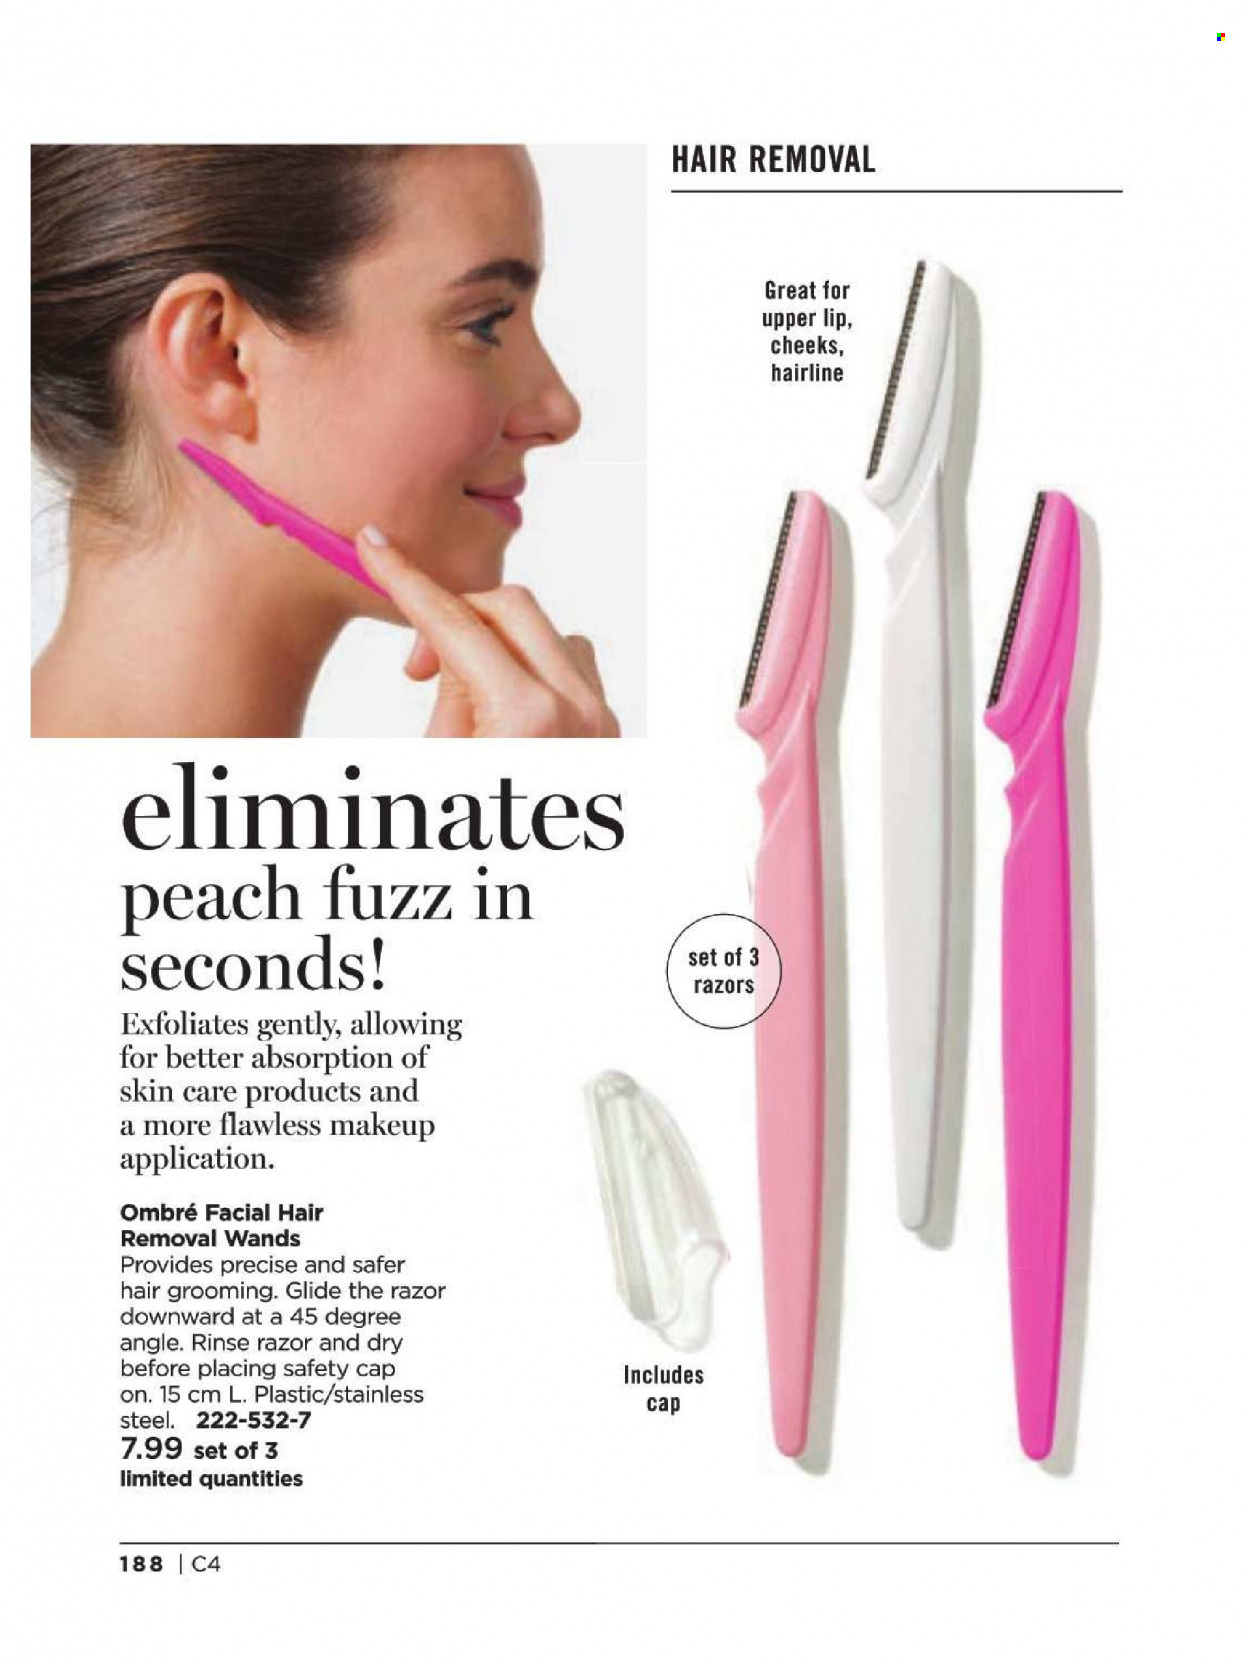 thumbnail - Avon Flyer - Sales products - razor, hair removal, makeup, cap. Page 188.